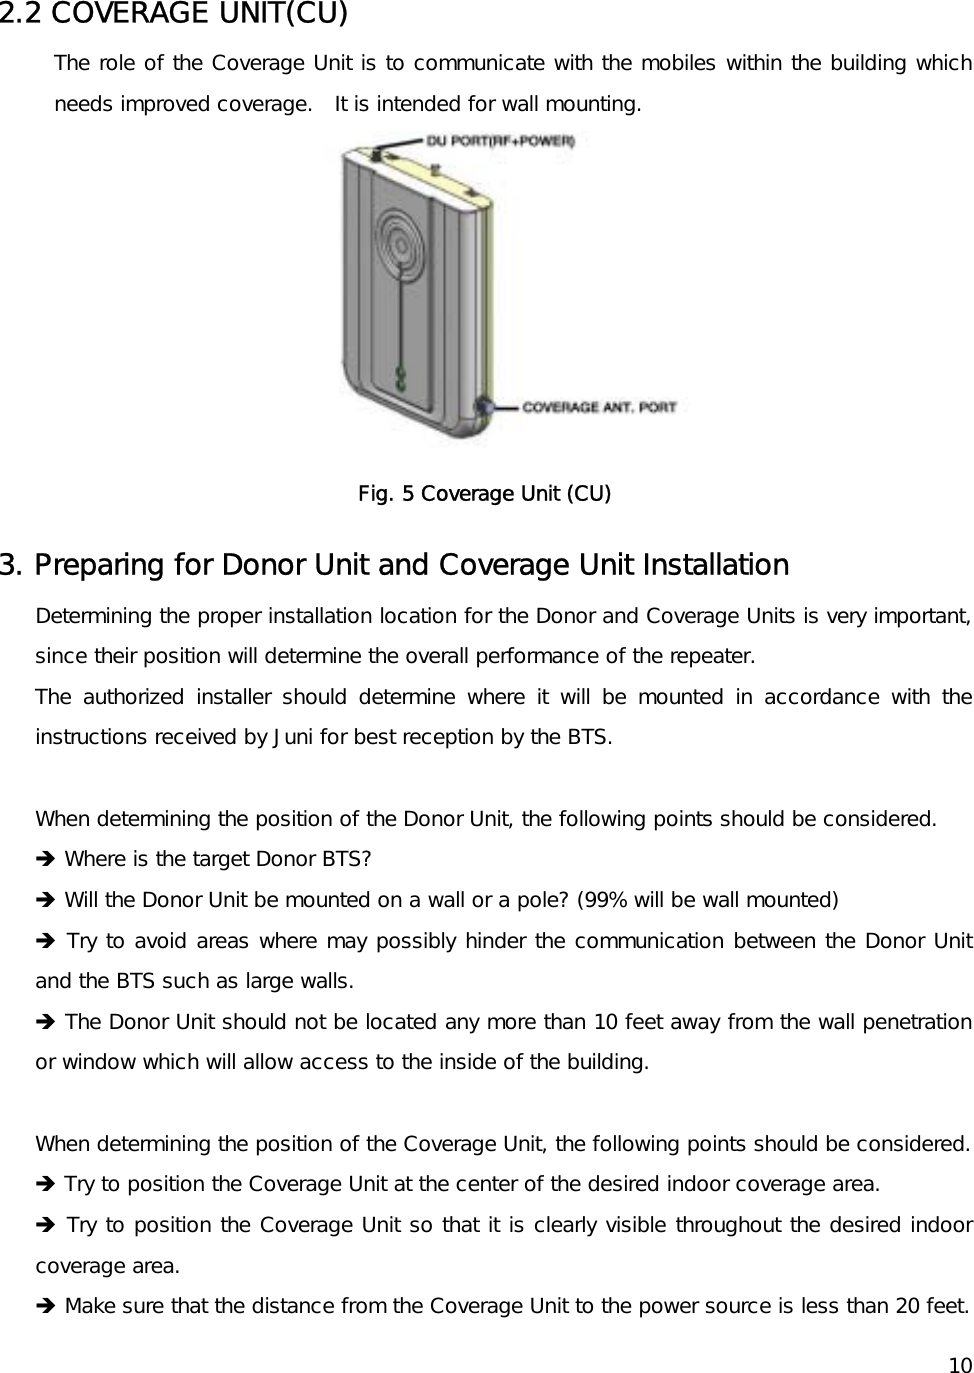    10  2.2 COVERAGE UNIT(CU) The role of the Coverage Unit is to communicate with the mobiles within the building which needs improved coverage.   It is intended for wall mounting.  Fig. 5 Coverage Unit (CU) 3. Preparing for Donor Unit and Coverage Unit Installation Determining the proper installation location for the Donor and Coverage Units is very important, since their position will determine the overall performance of the repeater. The authorized installer should determine where it will be mounted in accordance with the instructions received by Juni for best reception by the BTS.  When determining the position of the Donor Unit, the following points should be considered. Î Where is the target Donor BTS? Î Will the Donor Unit be mounted on a wall or a pole? (99% will be wall mounted) Î Try to avoid areas where may possibly hinder the communication between the Donor Unit and the BTS such as large walls. Î The Donor Unit should not be located any more than 10 feet away from the wall penetration or window which will allow access to the inside of the building.  When determining the position of the Coverage Unit, the following points should be considered. Î Try to position the Coverage Unit at the center of the desired indoor coverage area. Î Try to position the Coverage Unit so that it is clearly visible throughout the desired indoor coverage area. Î Make sure that the distance from the Coverage Unit to the power source is less than 20 feet. 